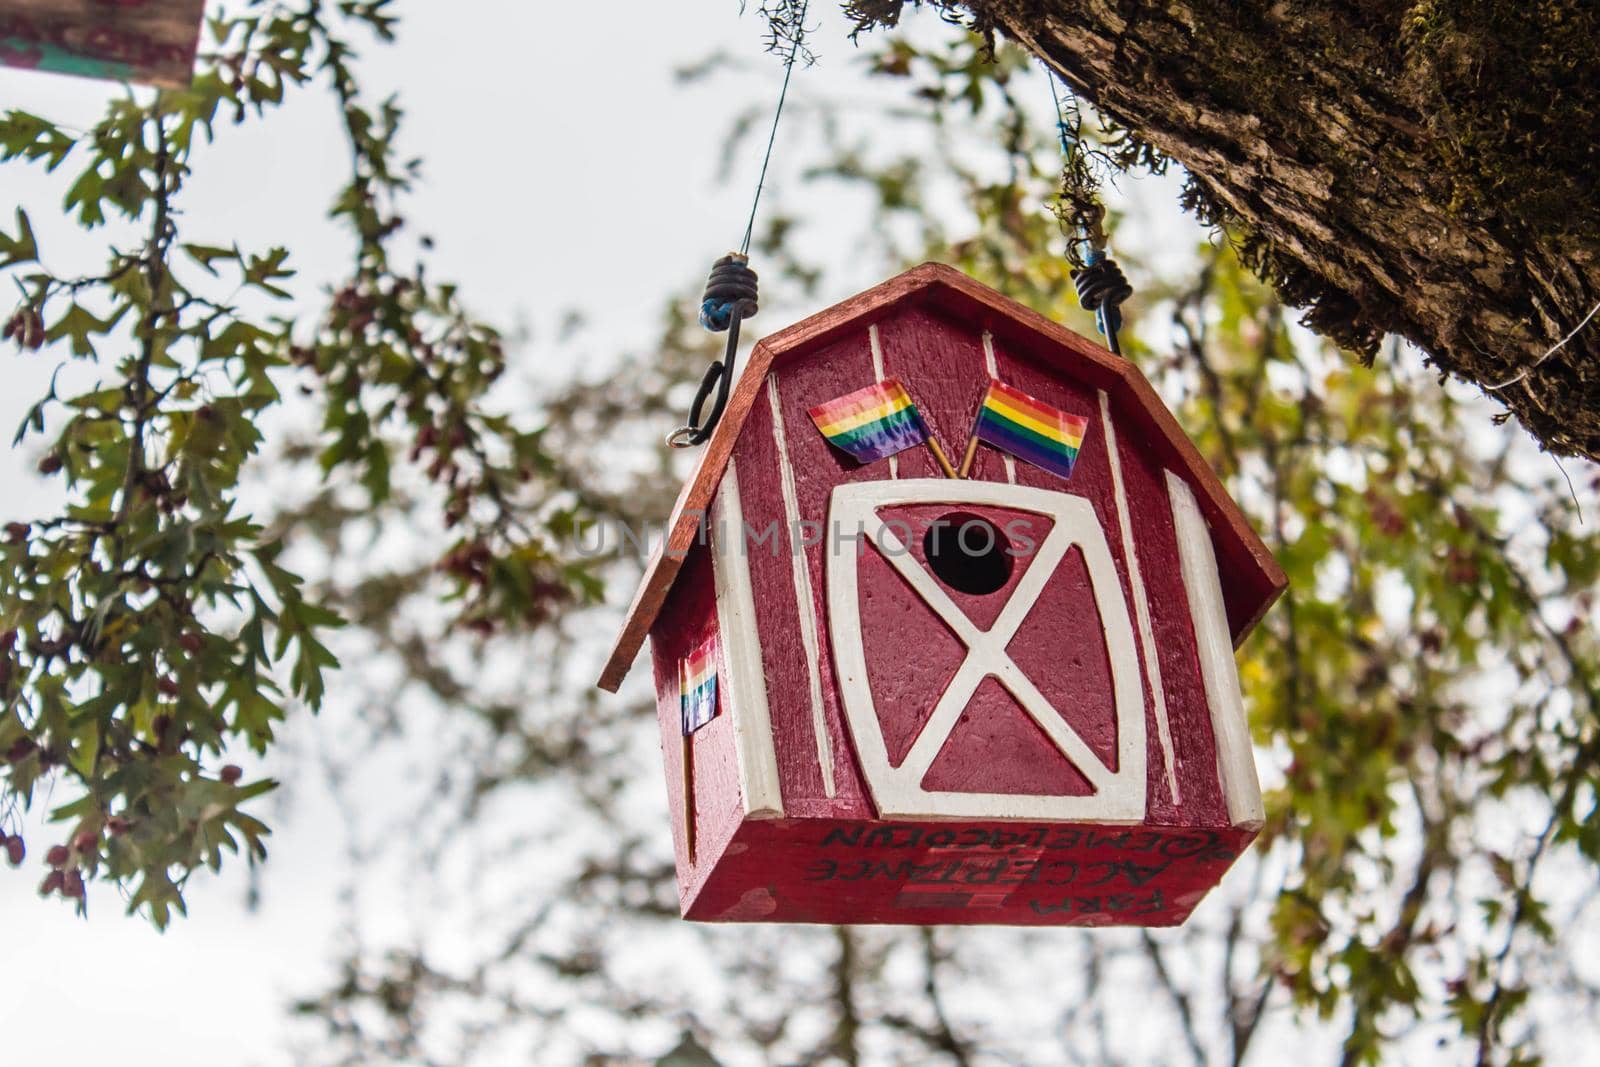 Vancouver, British Columbia, Canada - September 23, 2017: The red birdhouse on a tree in spring forest background